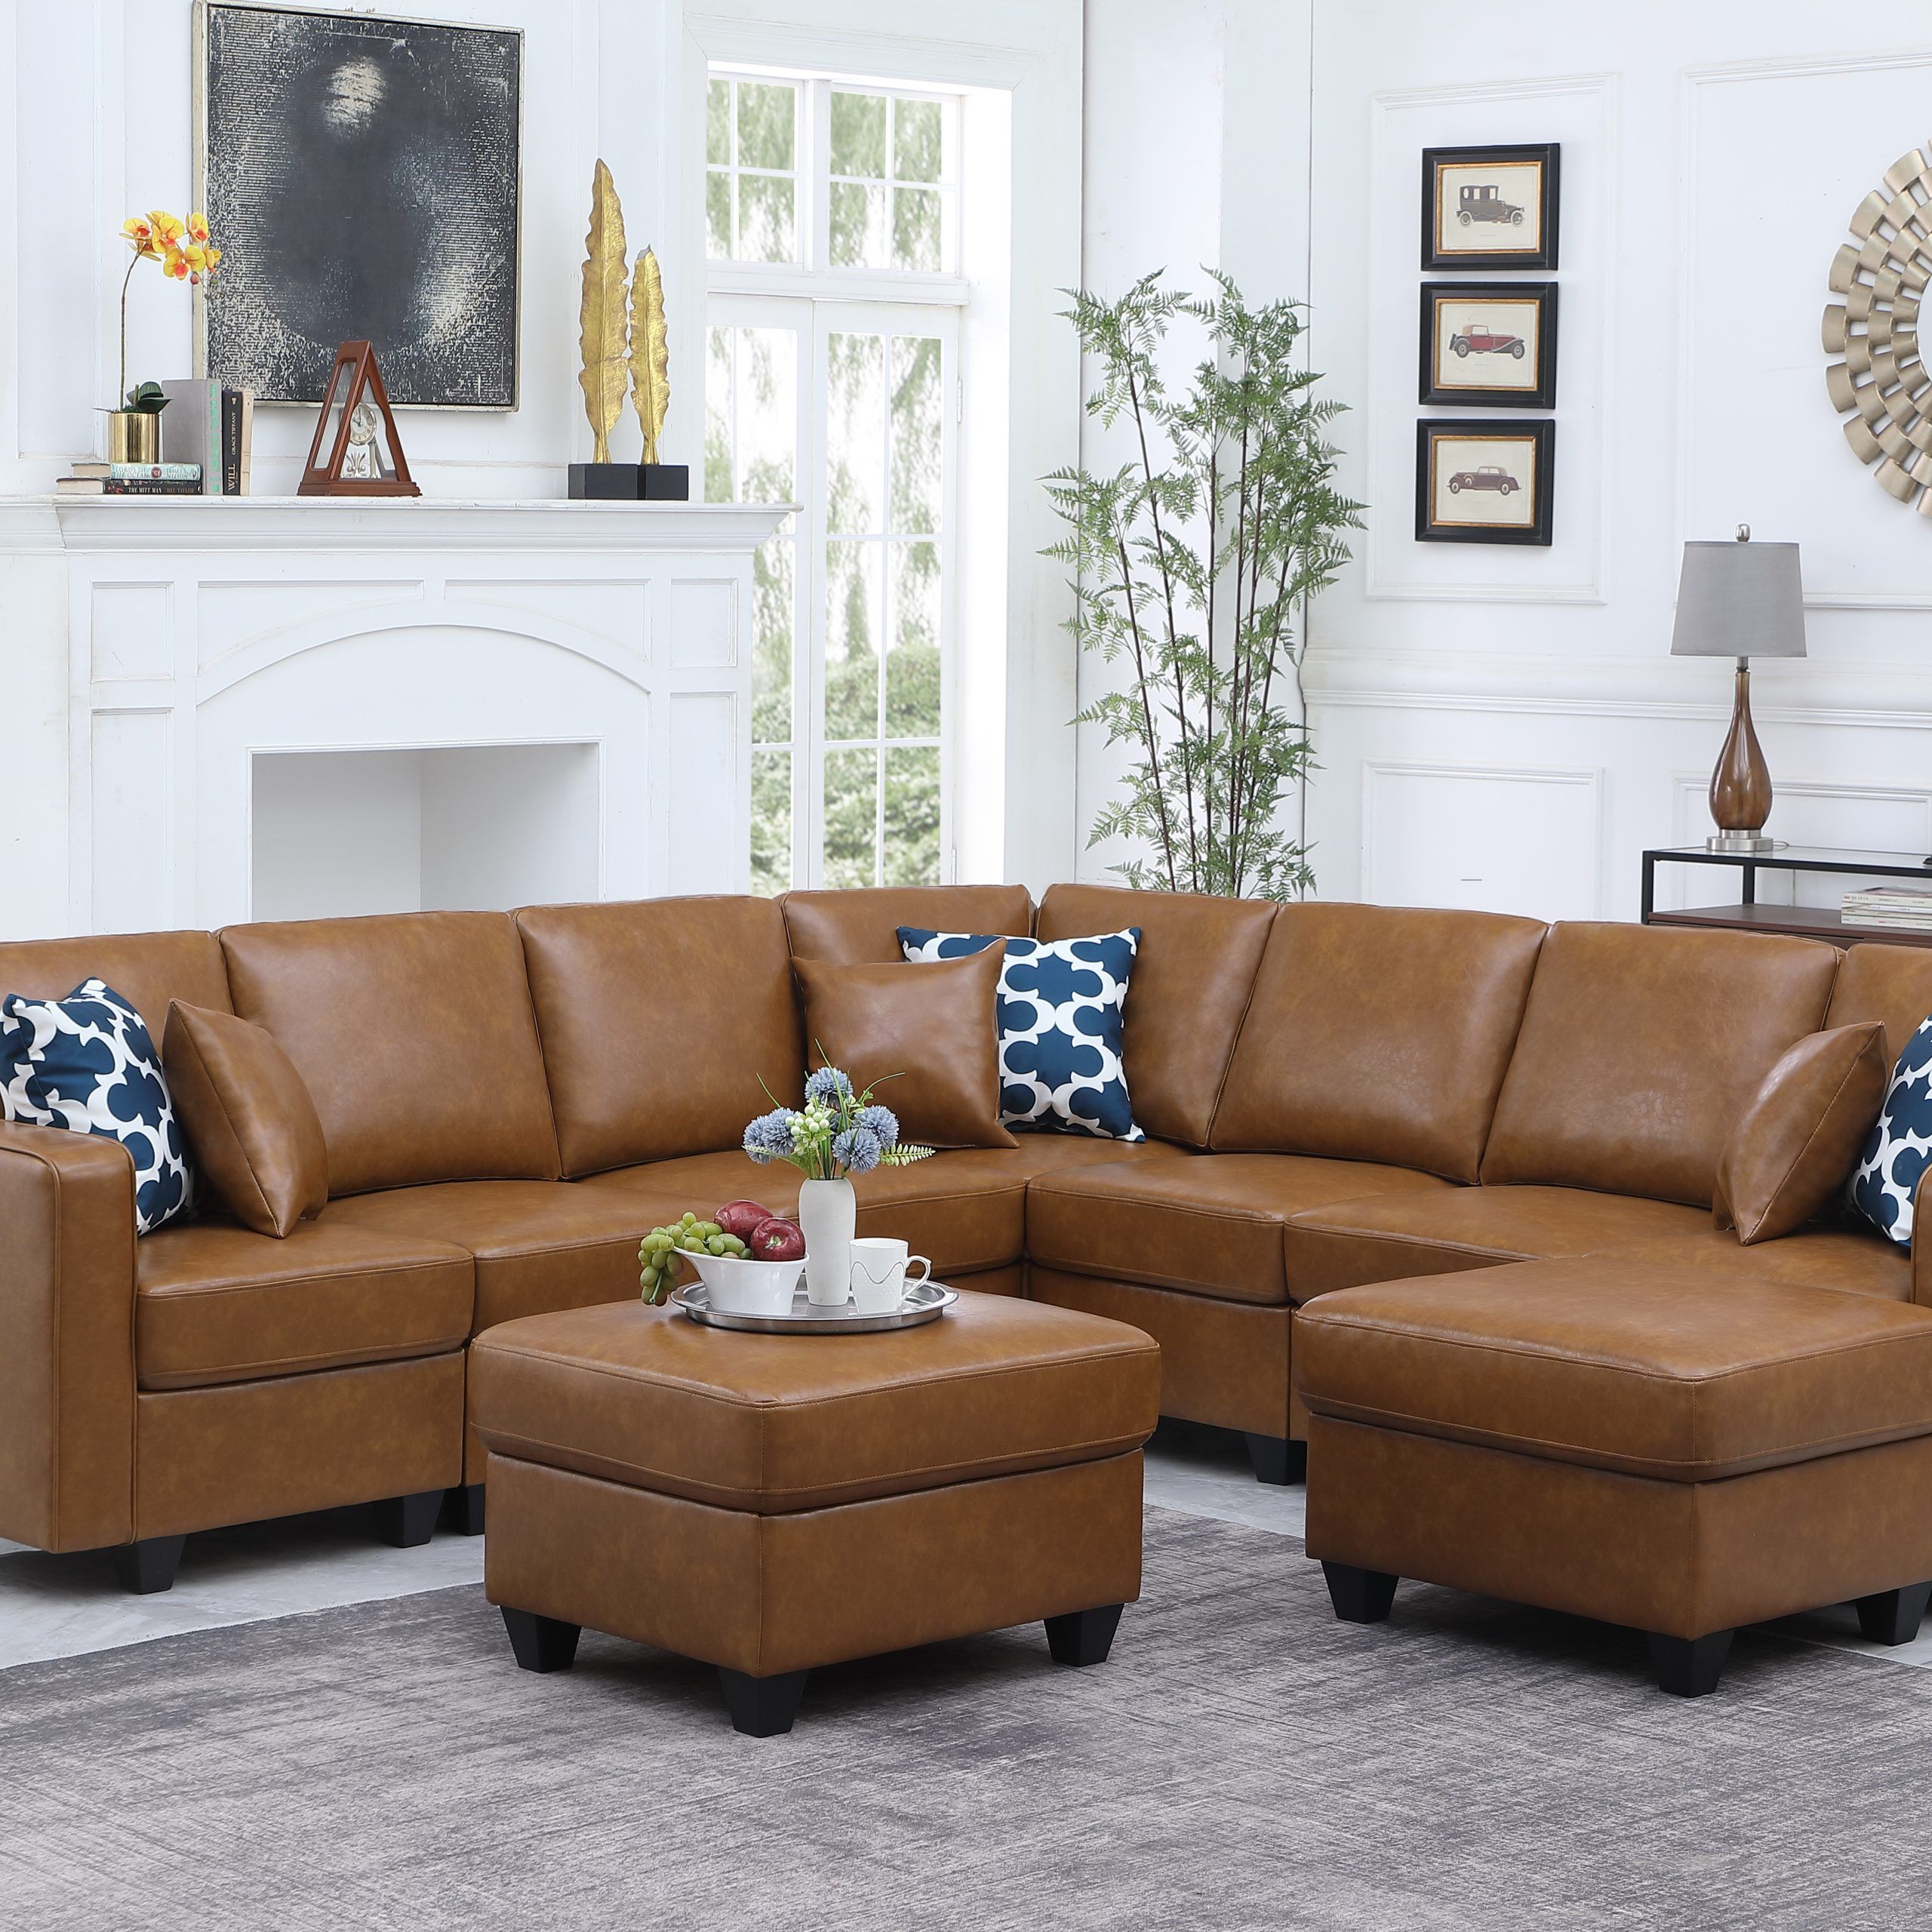 Devion Furniture 9 – Piece Vegan Leather Sectional & Reviews | Wayfair Inside Faux Leather Sectional Sofa Sets (View 6 of 15)